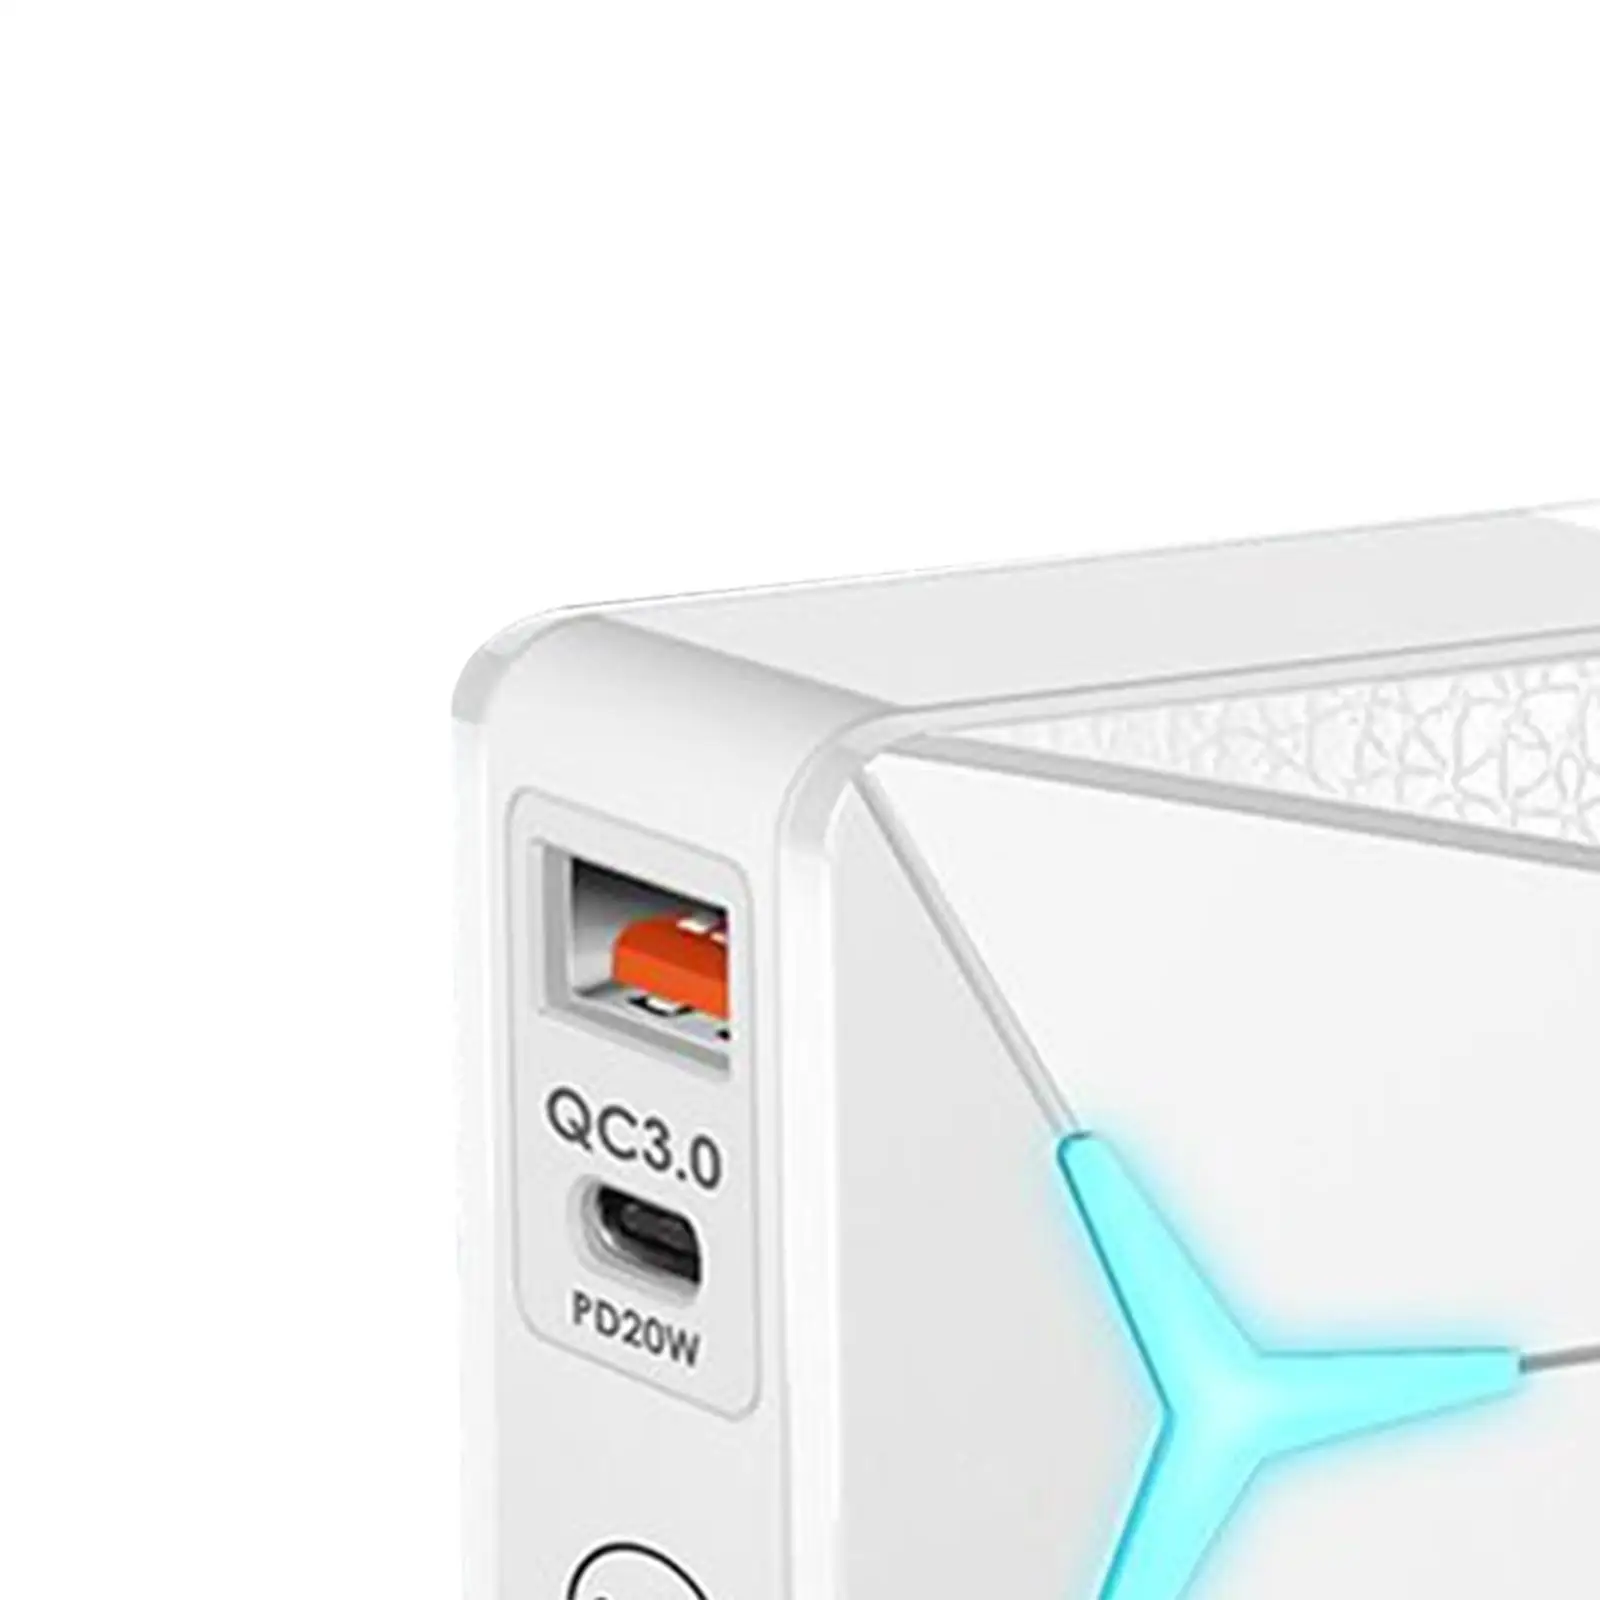 PD 20W QC3.0 Phone Charger Charging 5V / 4A 9V / 2.4A 12V / 1.8A USB Charging Block for Home Use Travel White